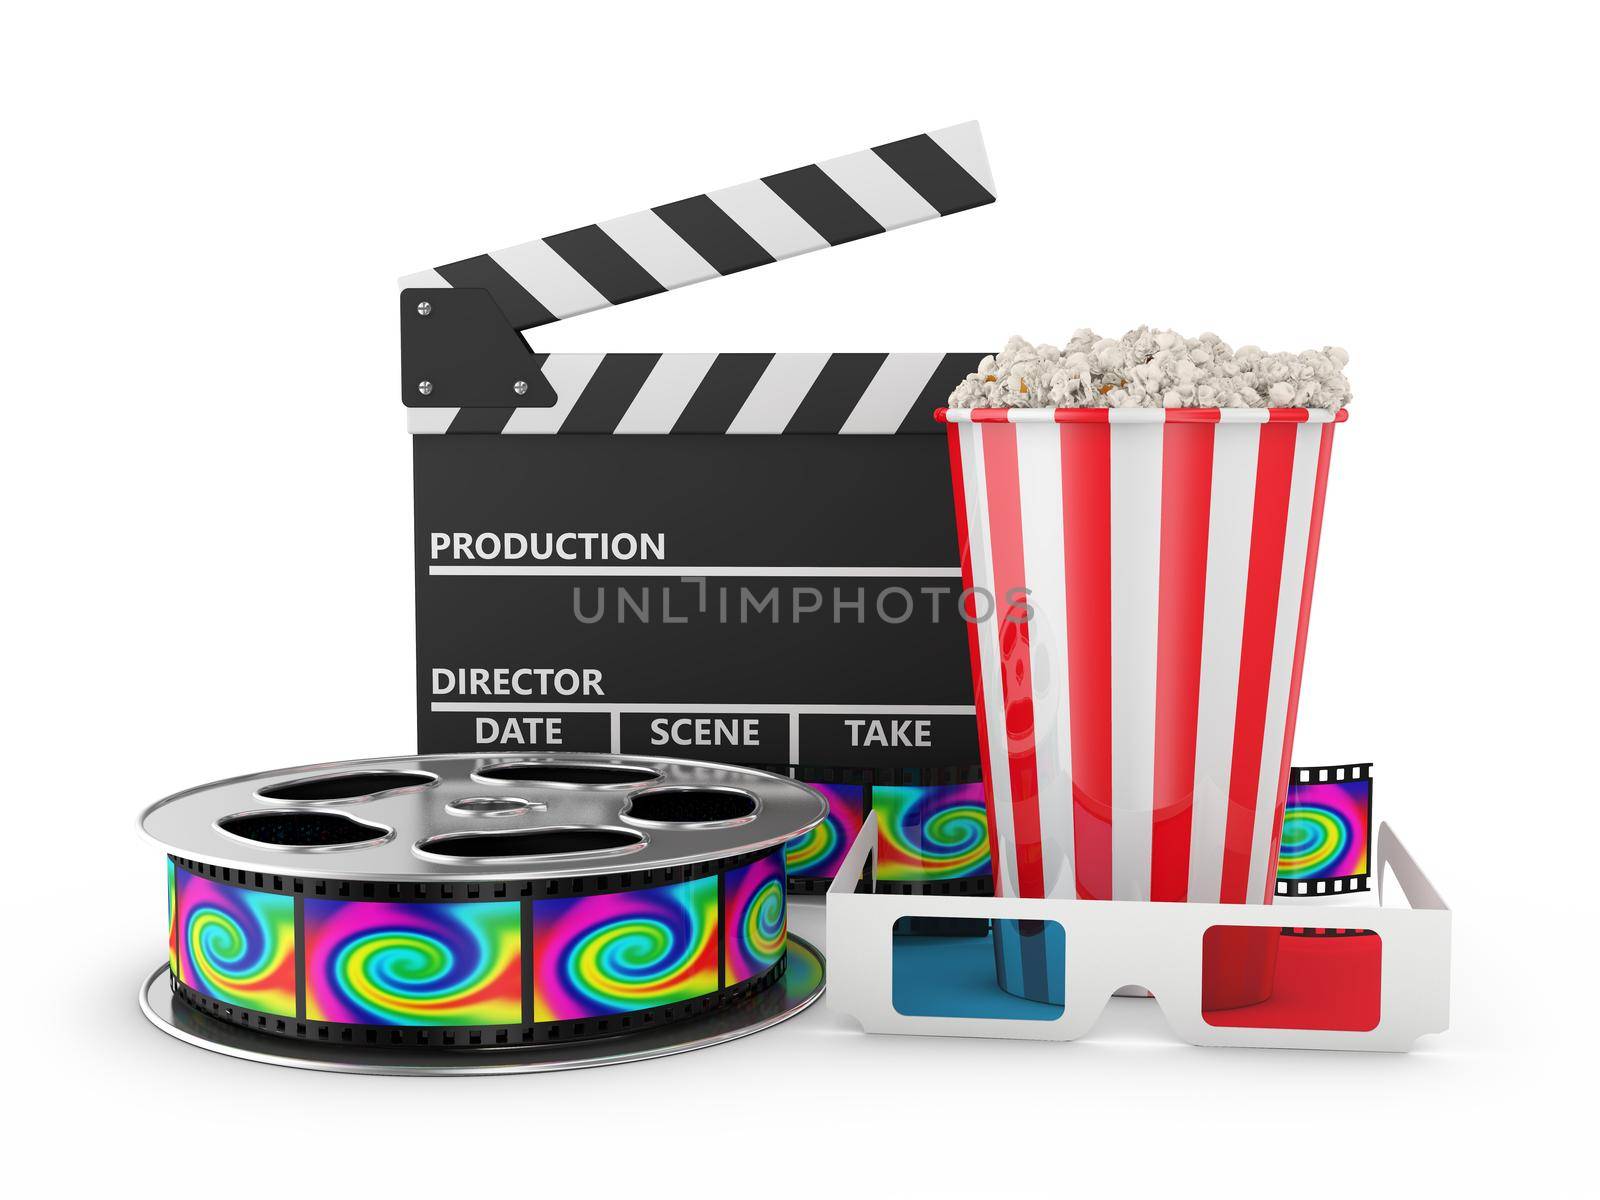 Popcorn, reel of film, 3D glasses and clapboard